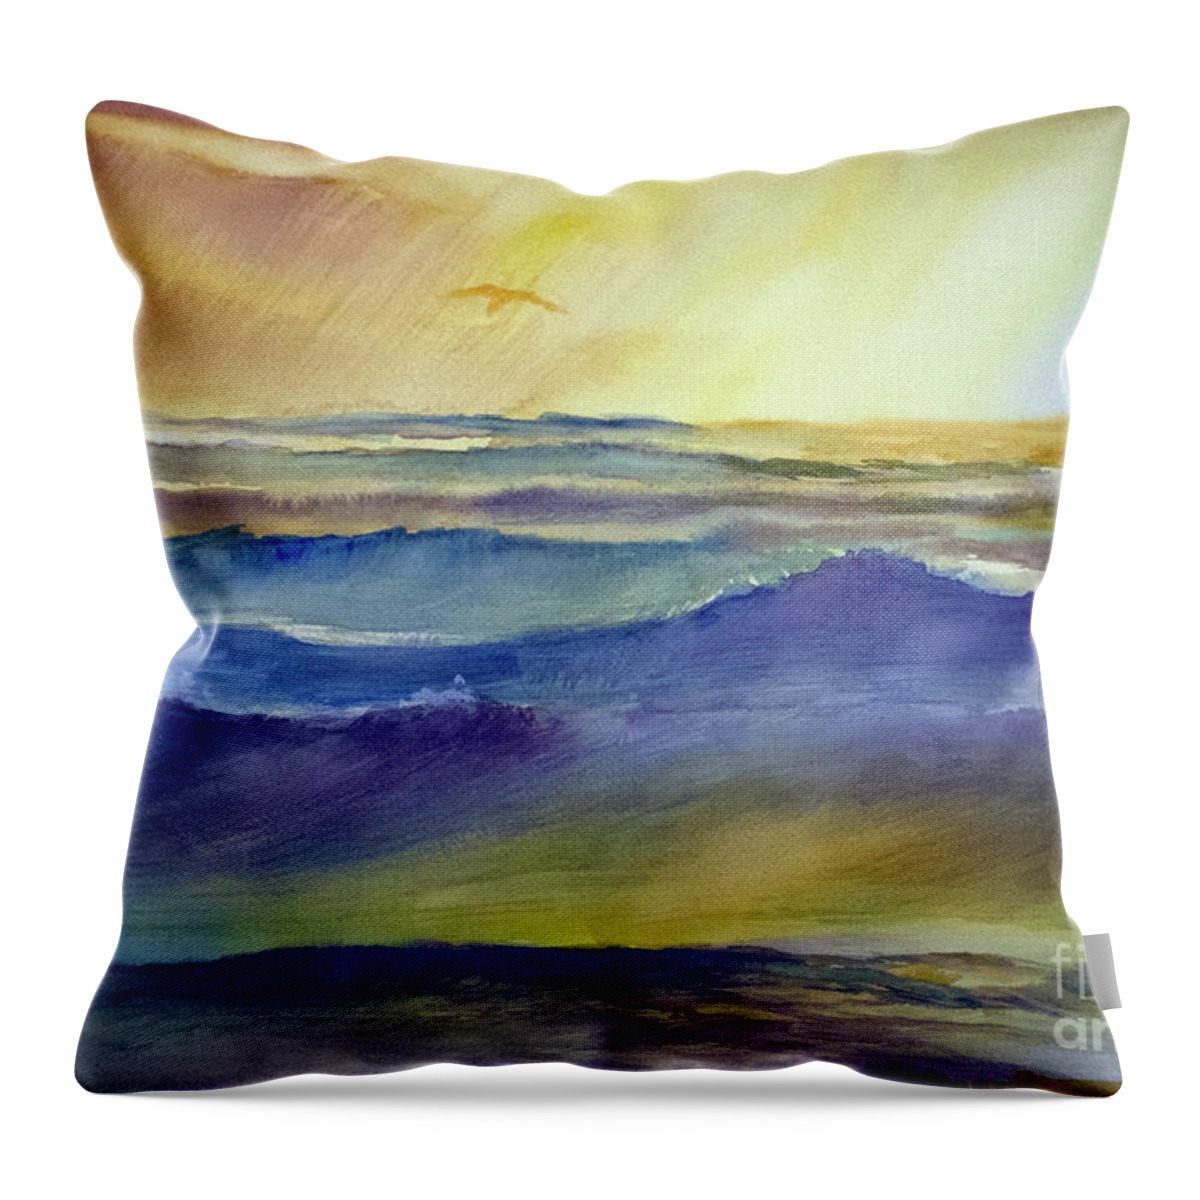 Sea Throw Pillow featuring the painting The Great Sea by Allison Ashton